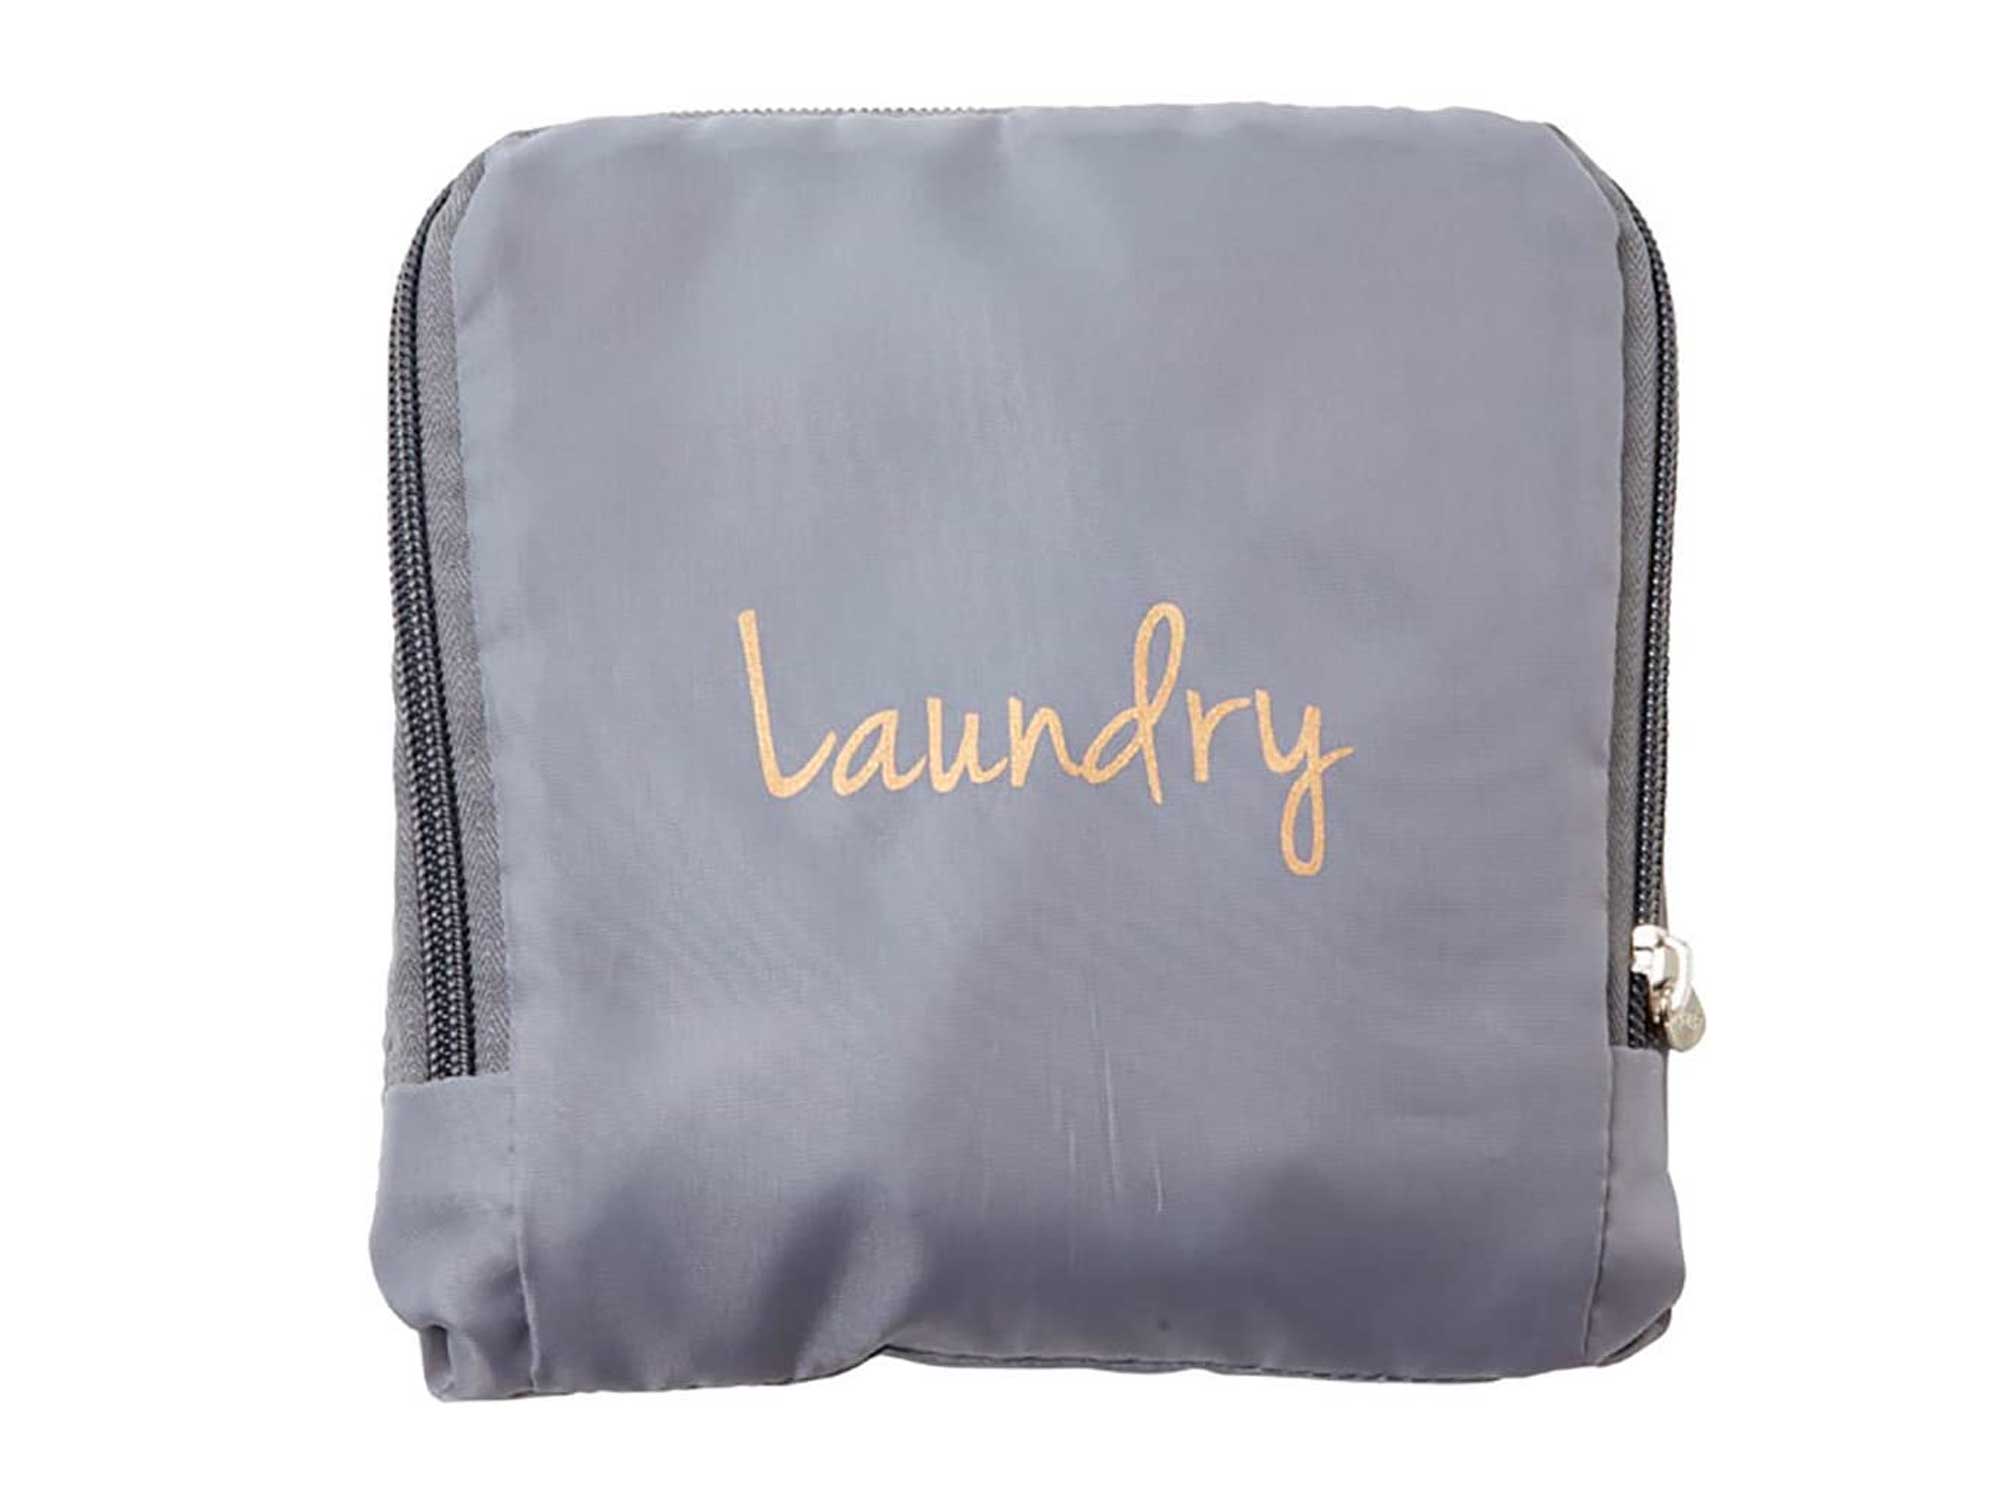 Miamica Laundry Bag, Assorted Styles, Grey/Gold, One Size